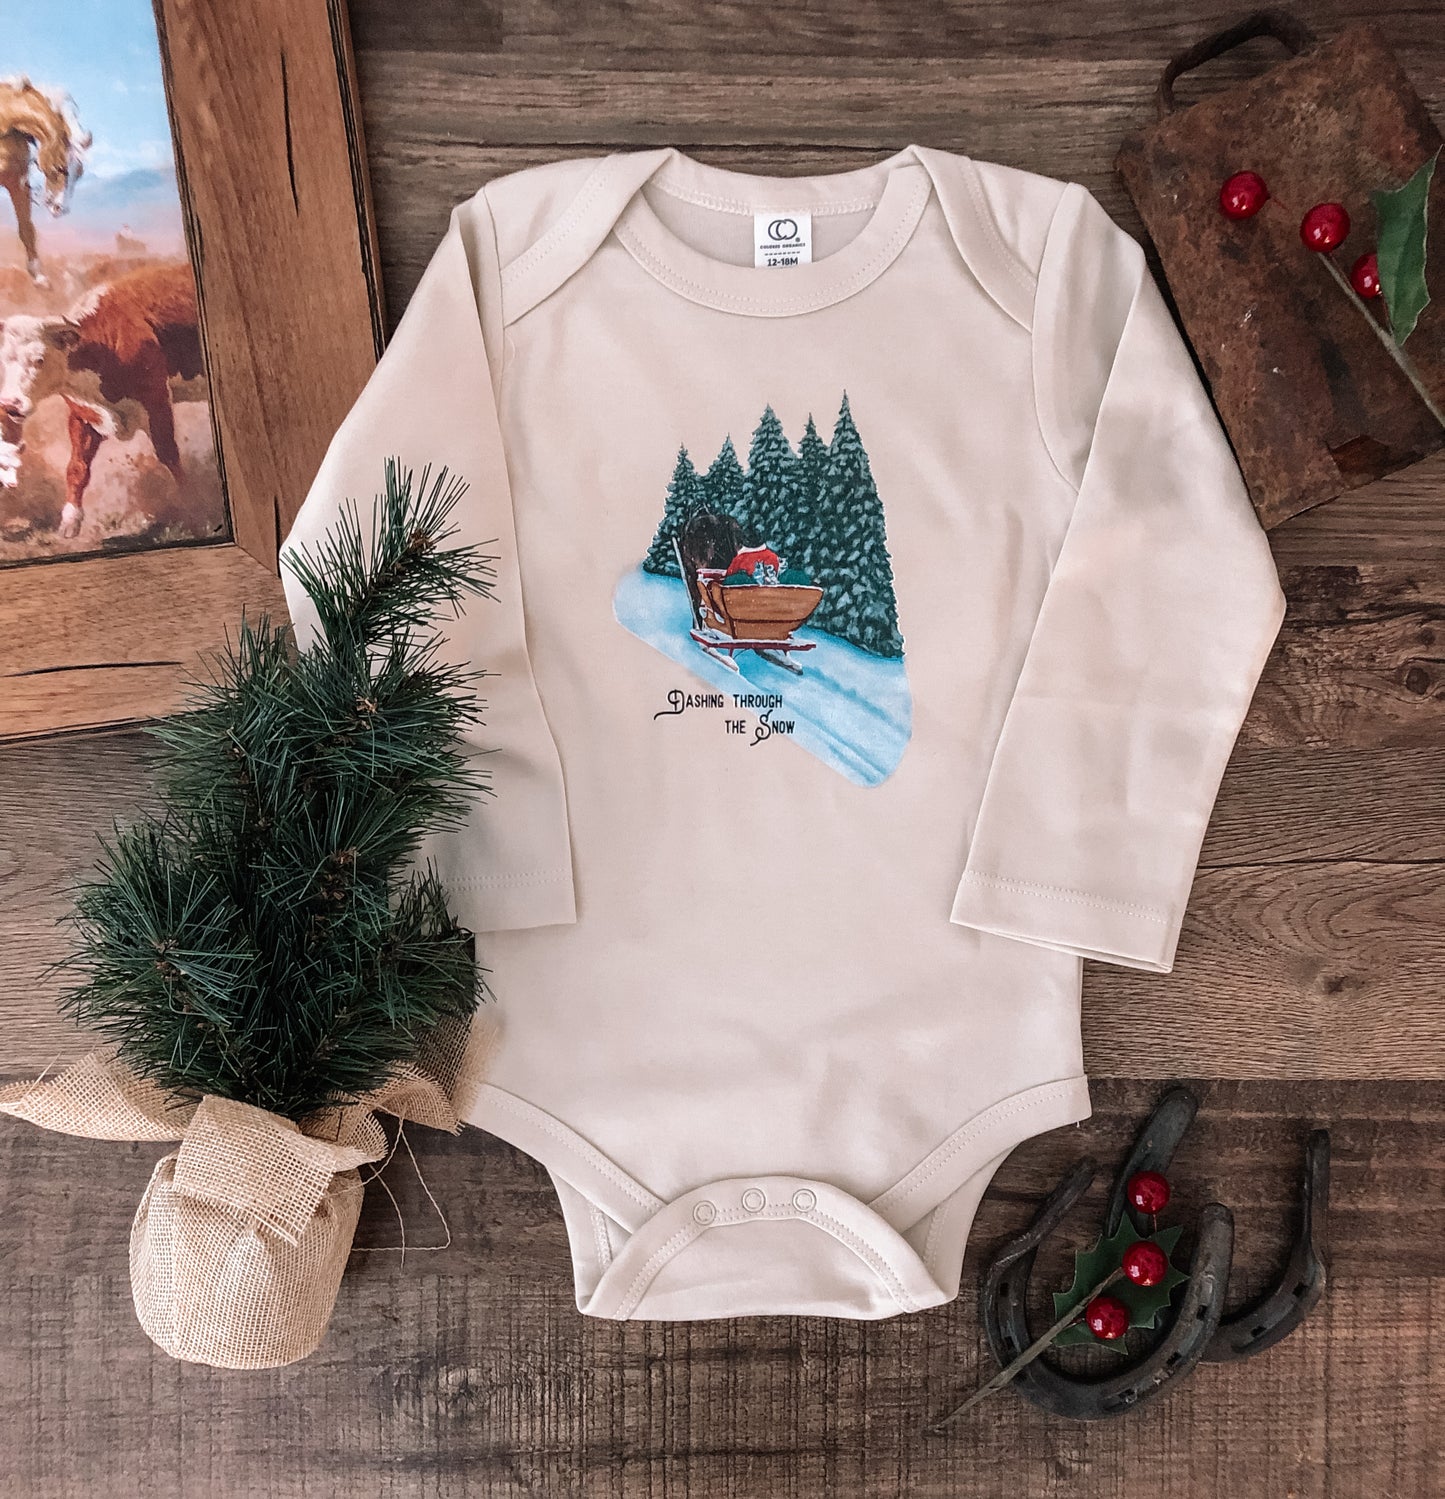 Dashing Through The Snow...With Cowpups In The Sleigh! (Baby, Toddler, & Youth) - Natural